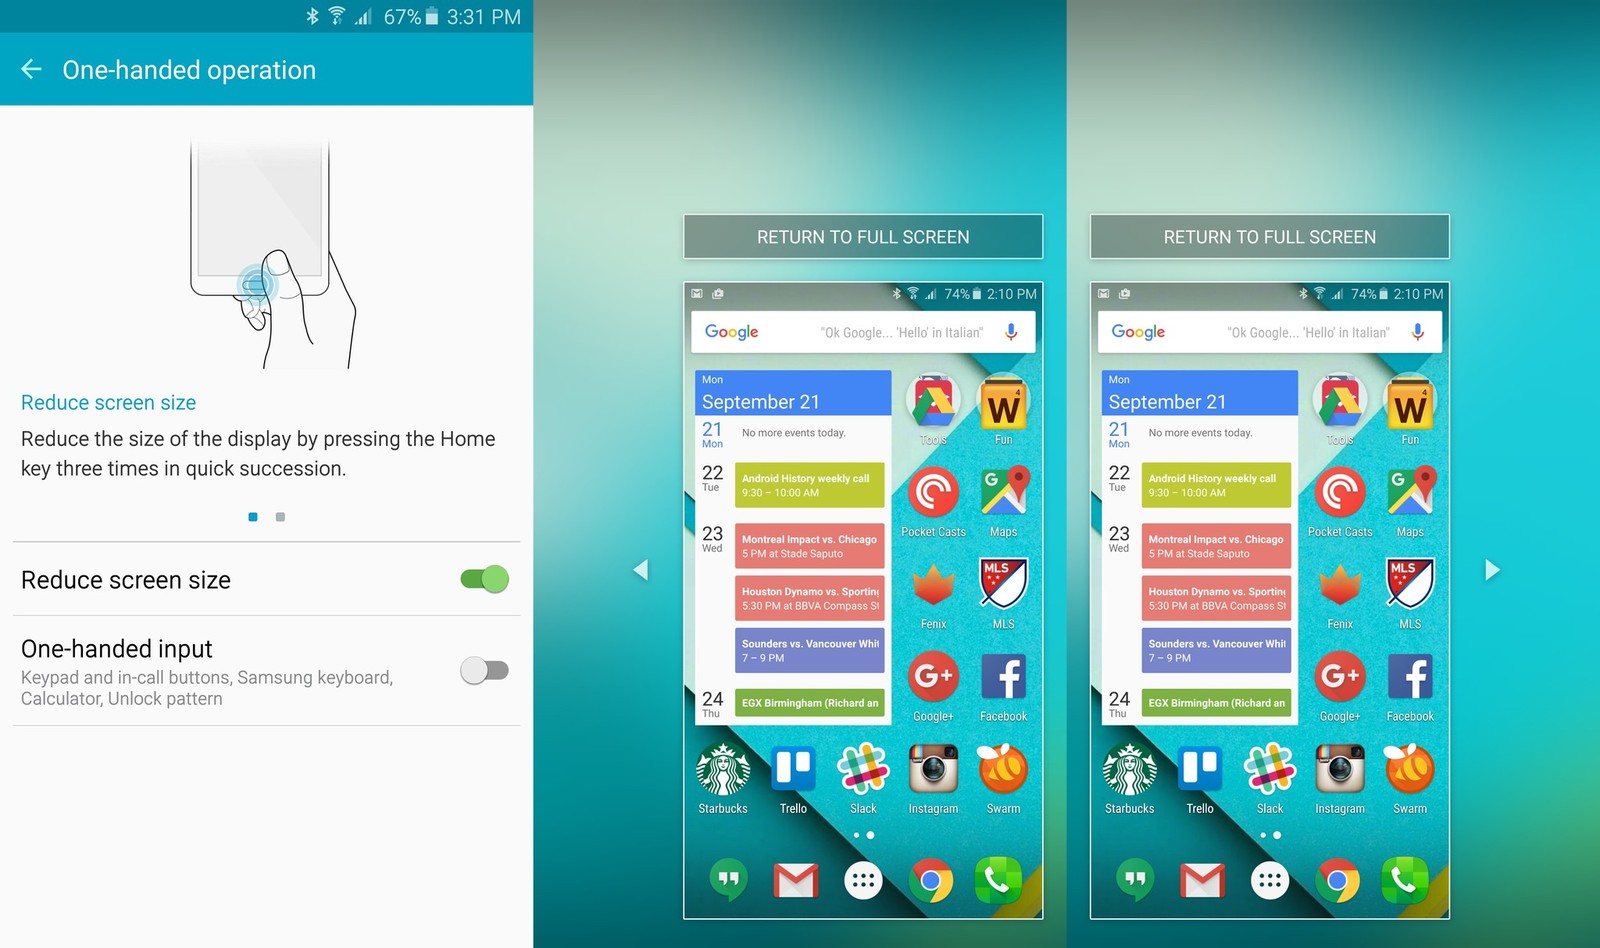 How to use the Galaxy Note 5's 'One handed operation' modes 